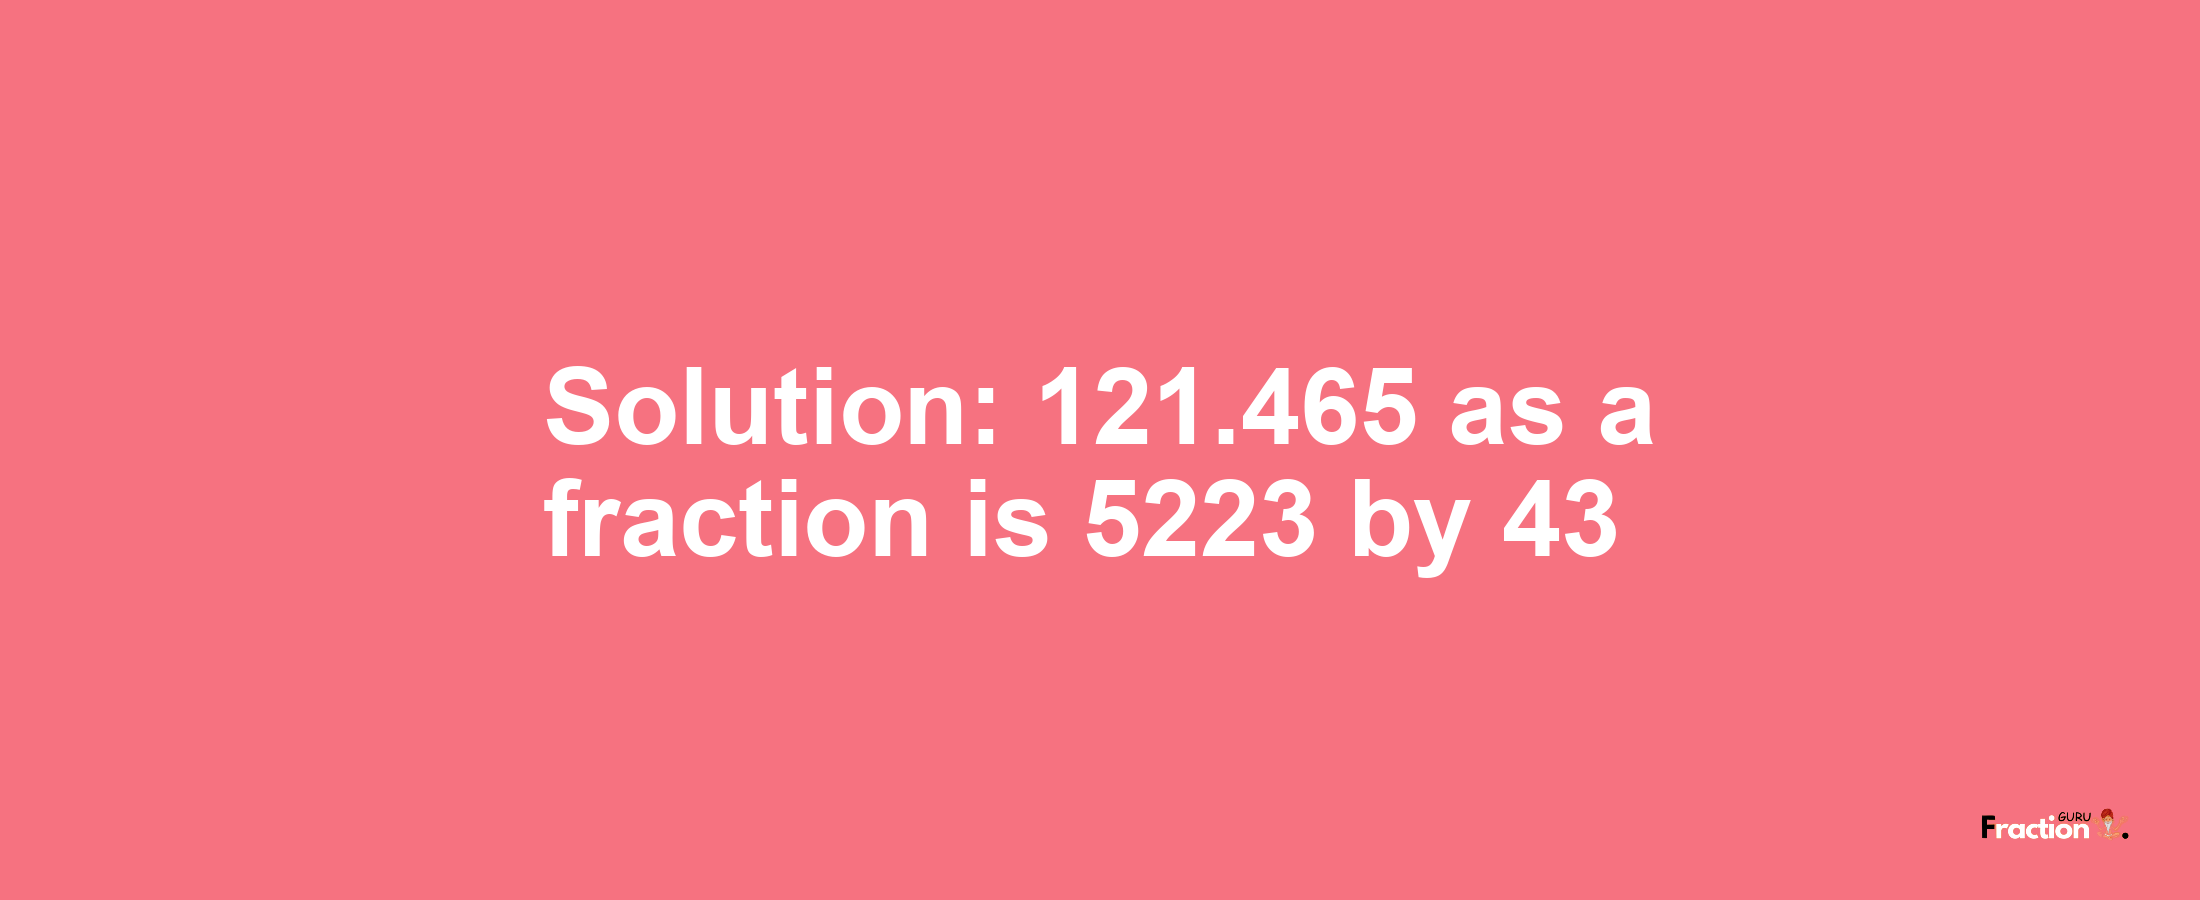 Solution:121.465 as a fraction is 5223/43